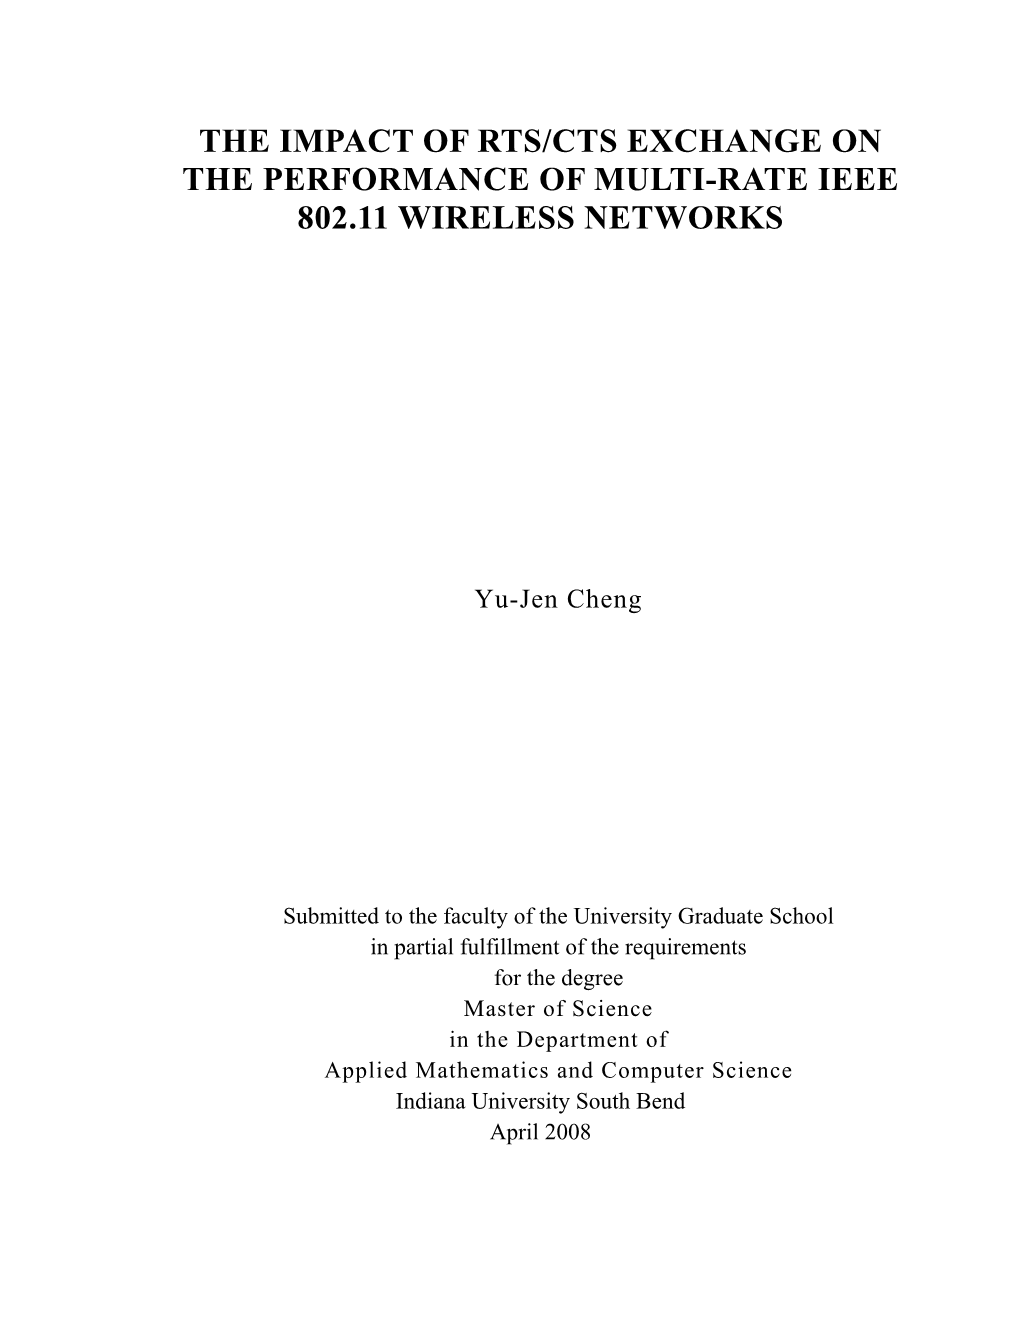 The Impact of Rts/Cts Exchange on the Performance of Multi-Rate Ieee 802.11 Wireless Networks